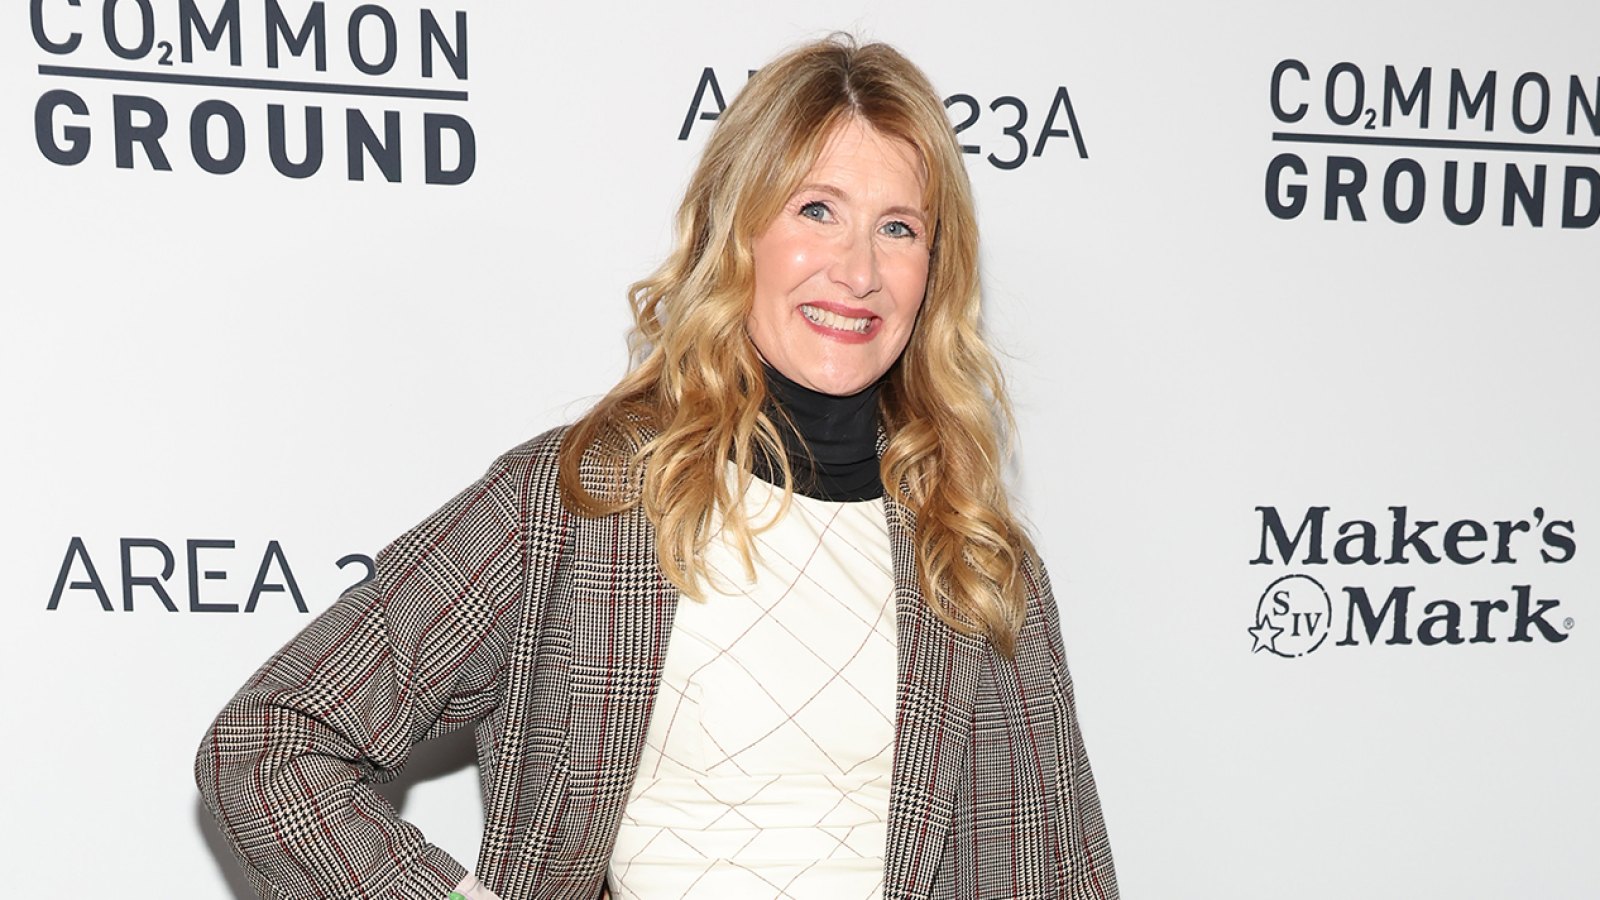 Laura Dern at the Los Angeles special screening of "Common Ground" in Beverly Hills, California on January 11, 2024.